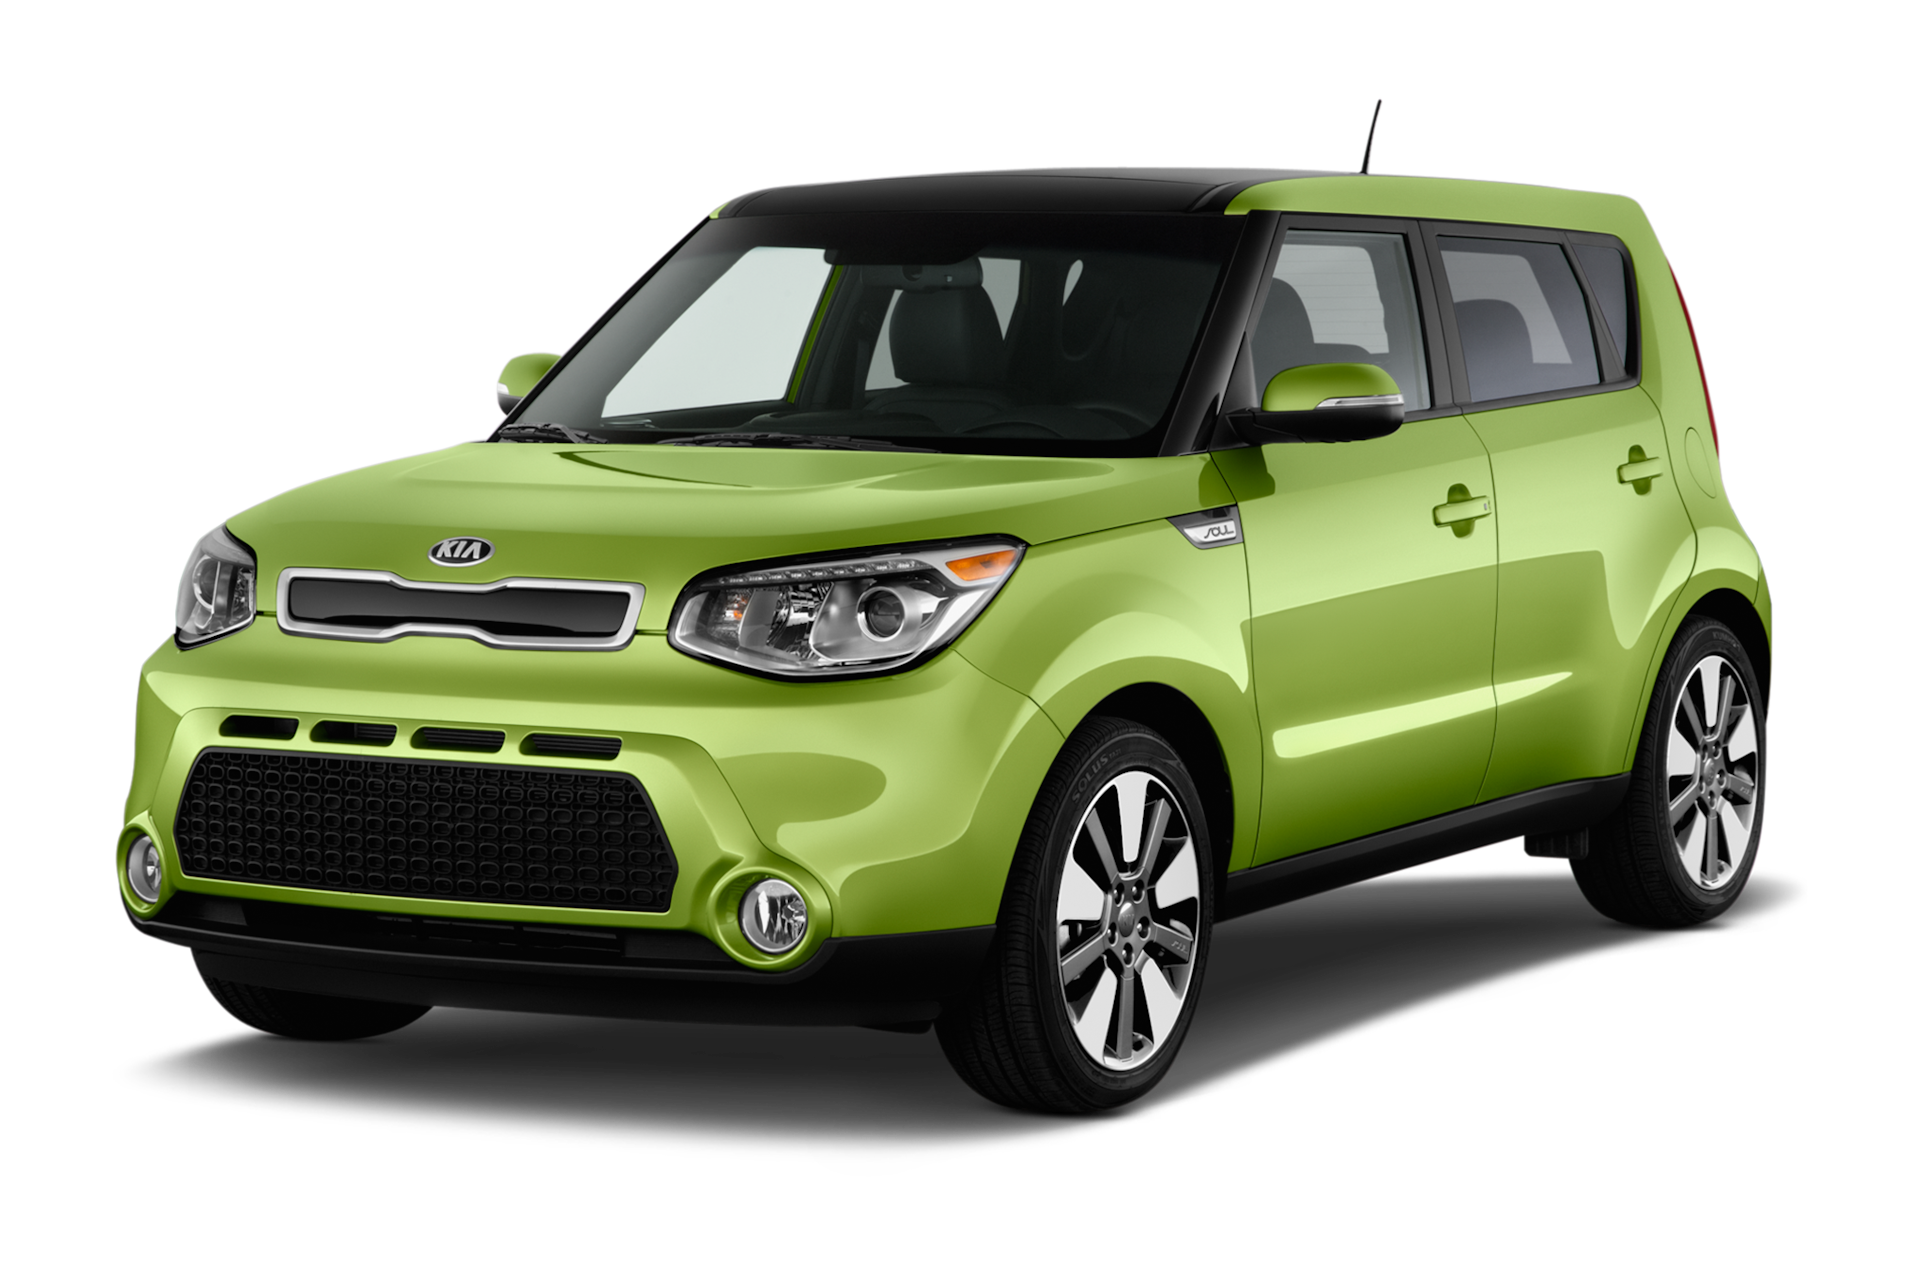 2014 Kia Soul Prices, Reviews, and Photos - MotorTrend